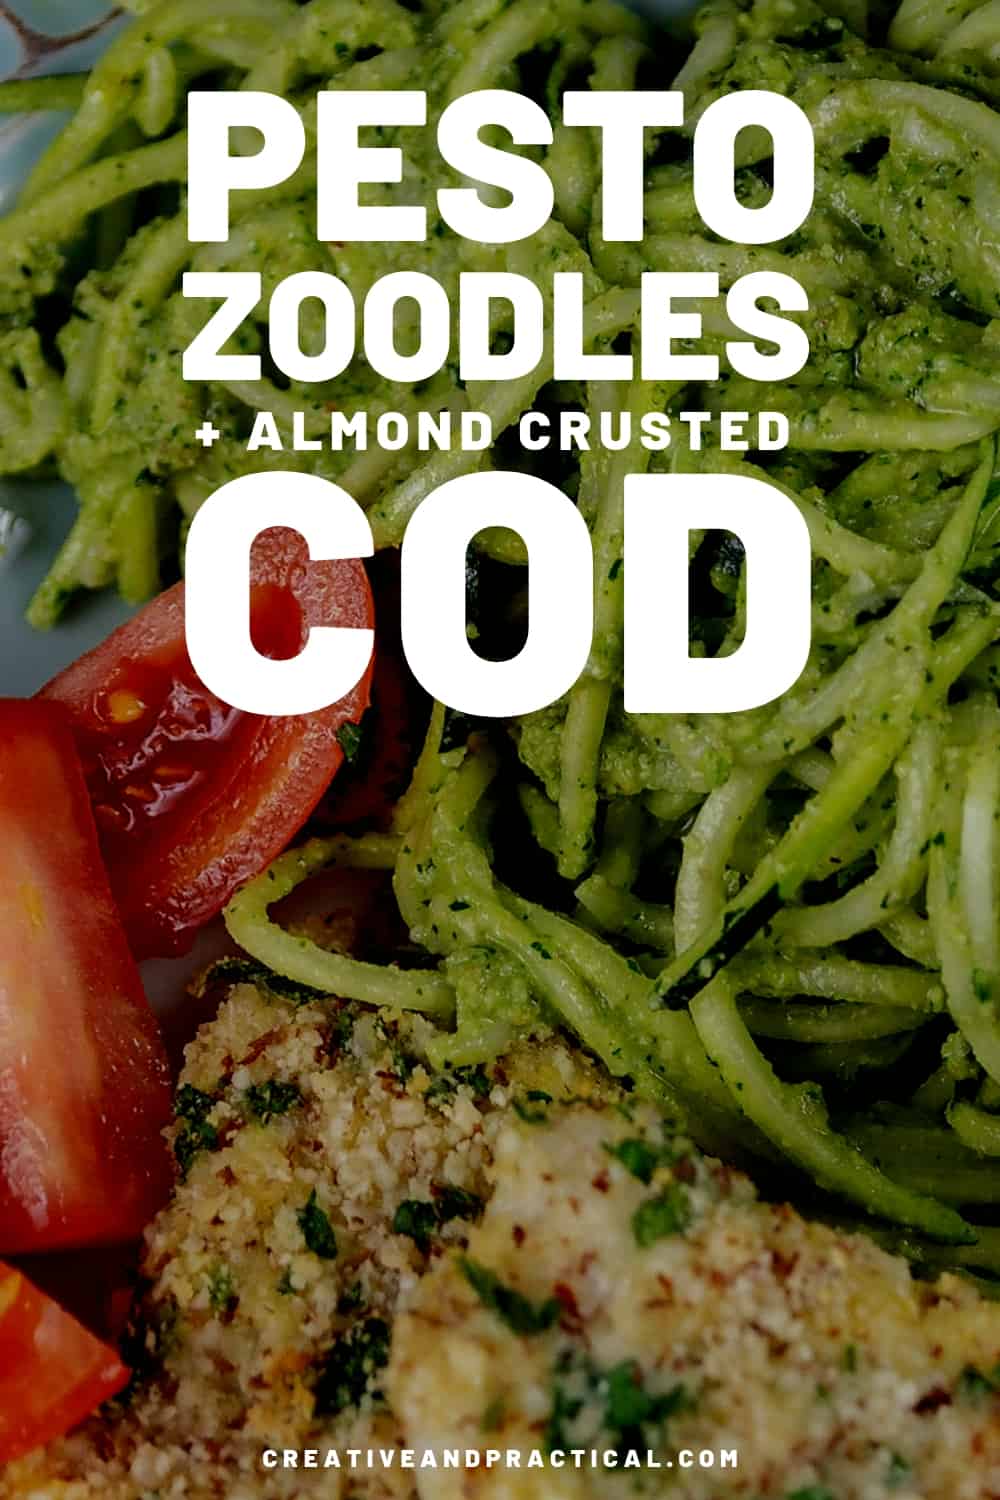 Pesto Zoodles with Almond Crusted Cod